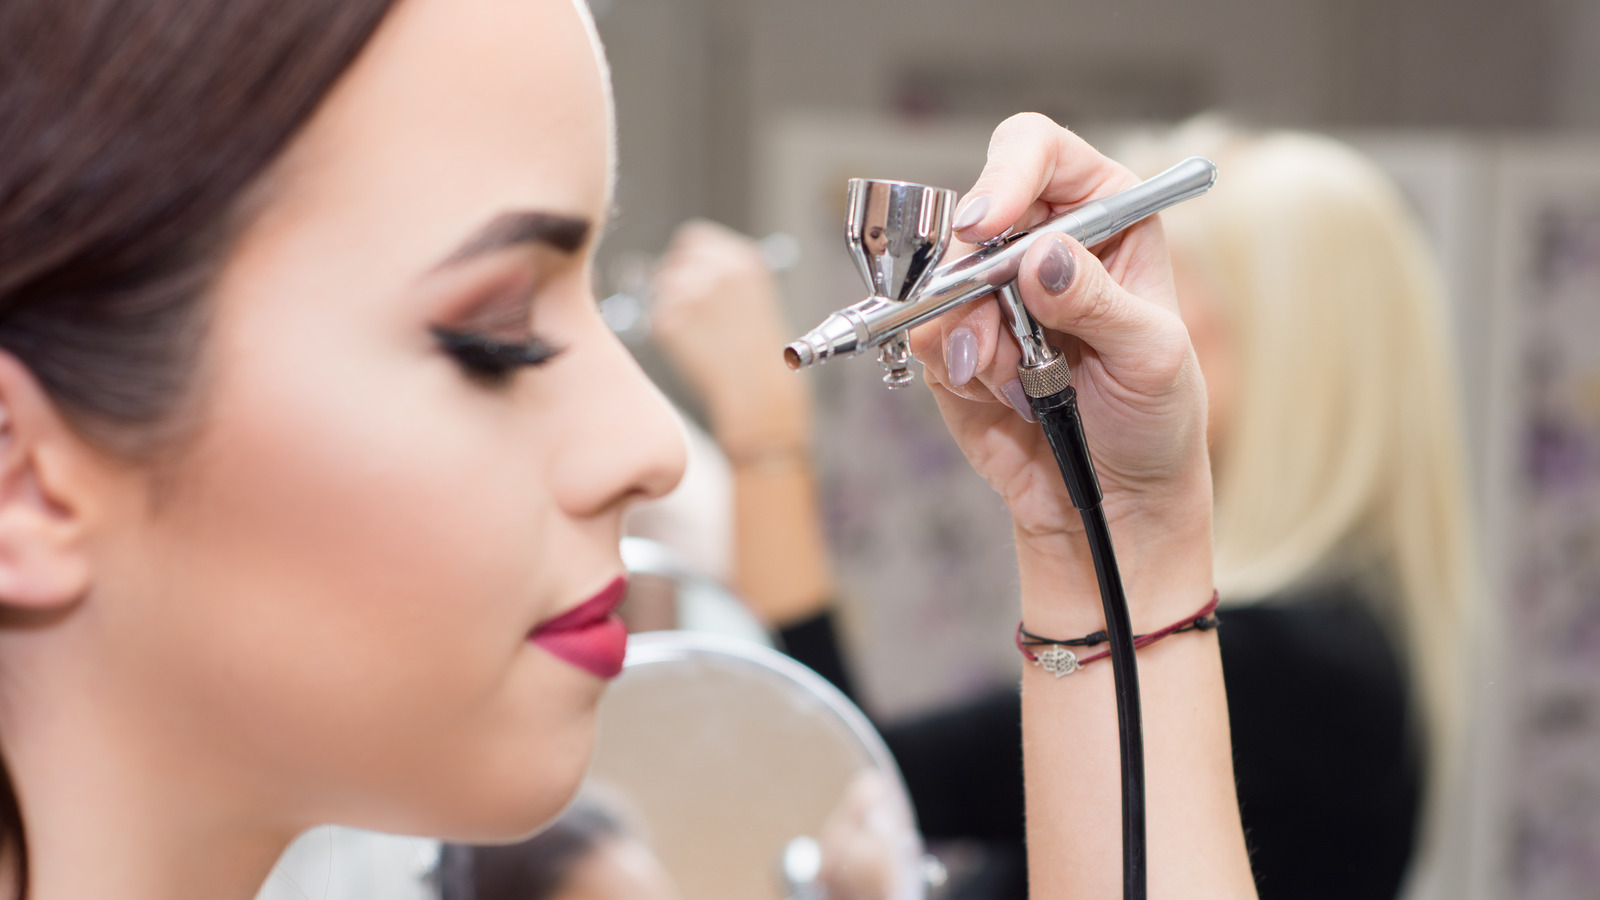 Your Ultimate Guide To Airbrush Makeup